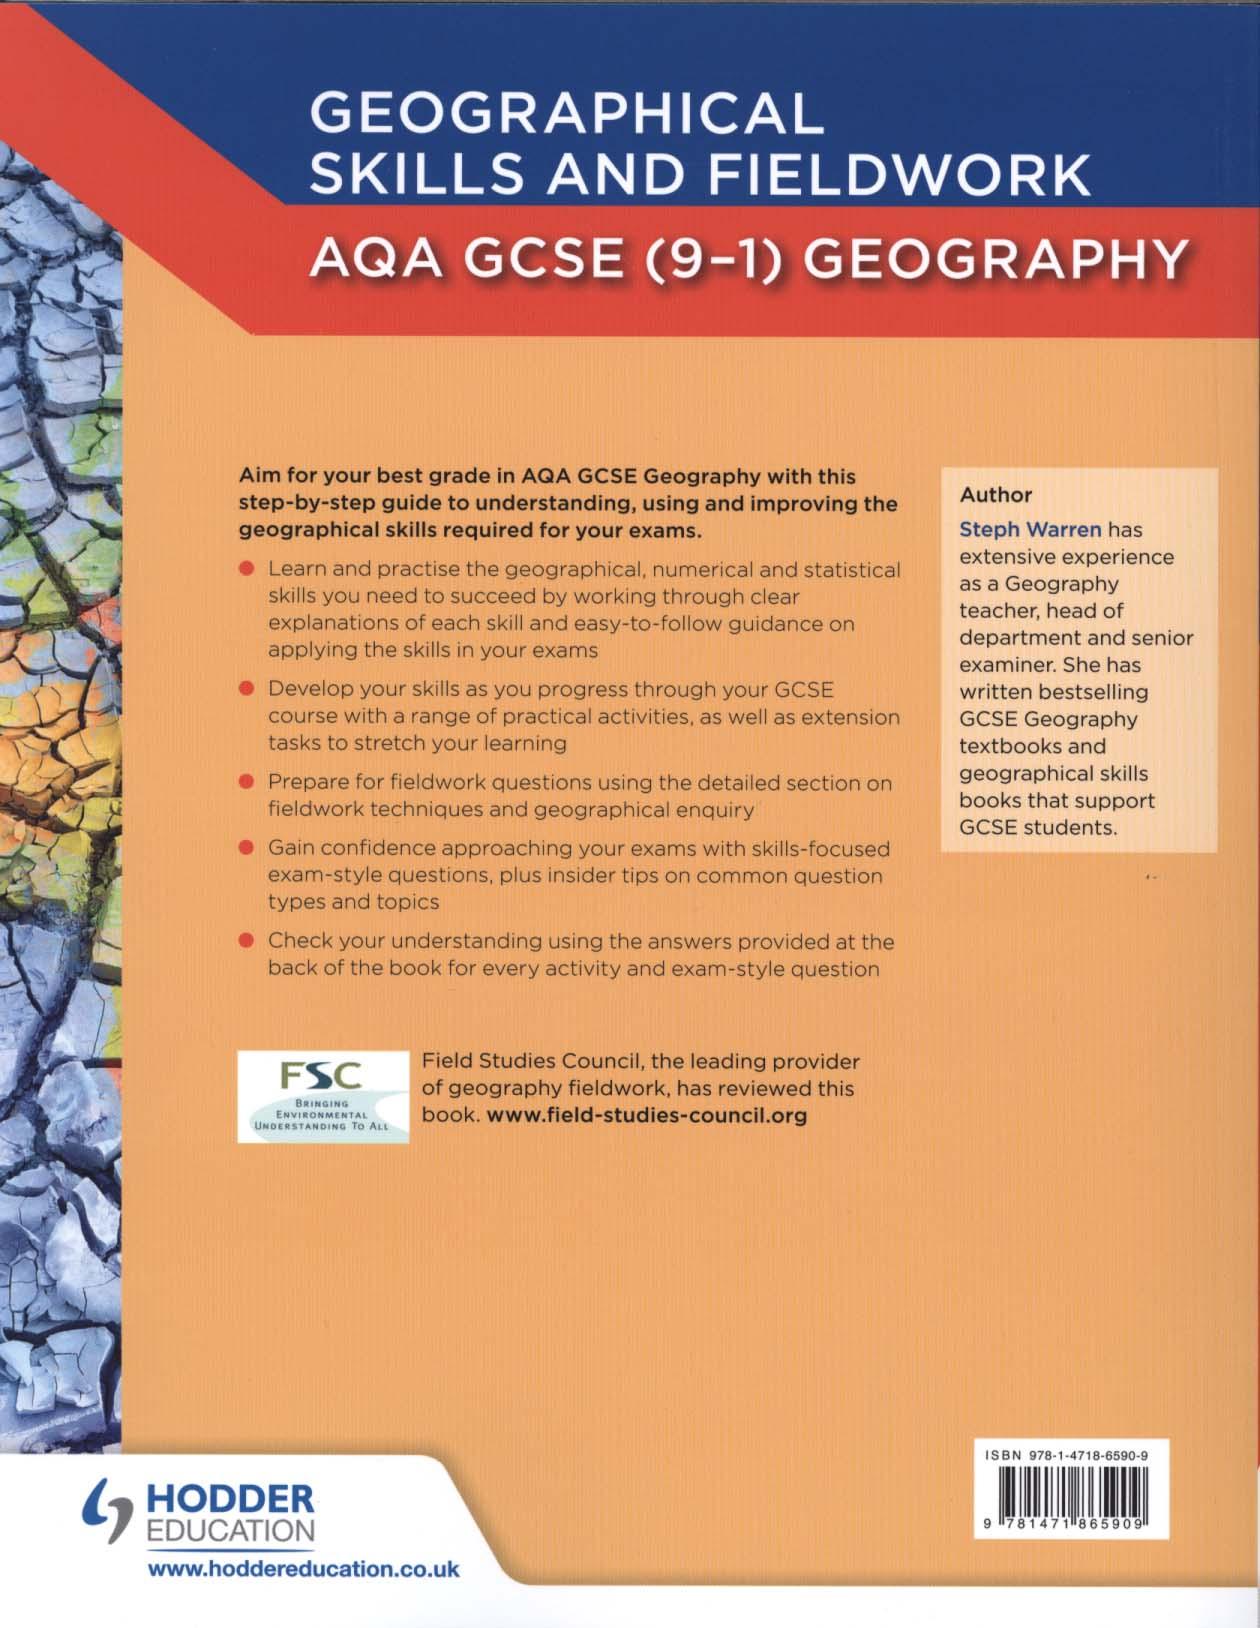 Geographical Skills and Fieldwork for AQA GCSE (9-1) Geograp